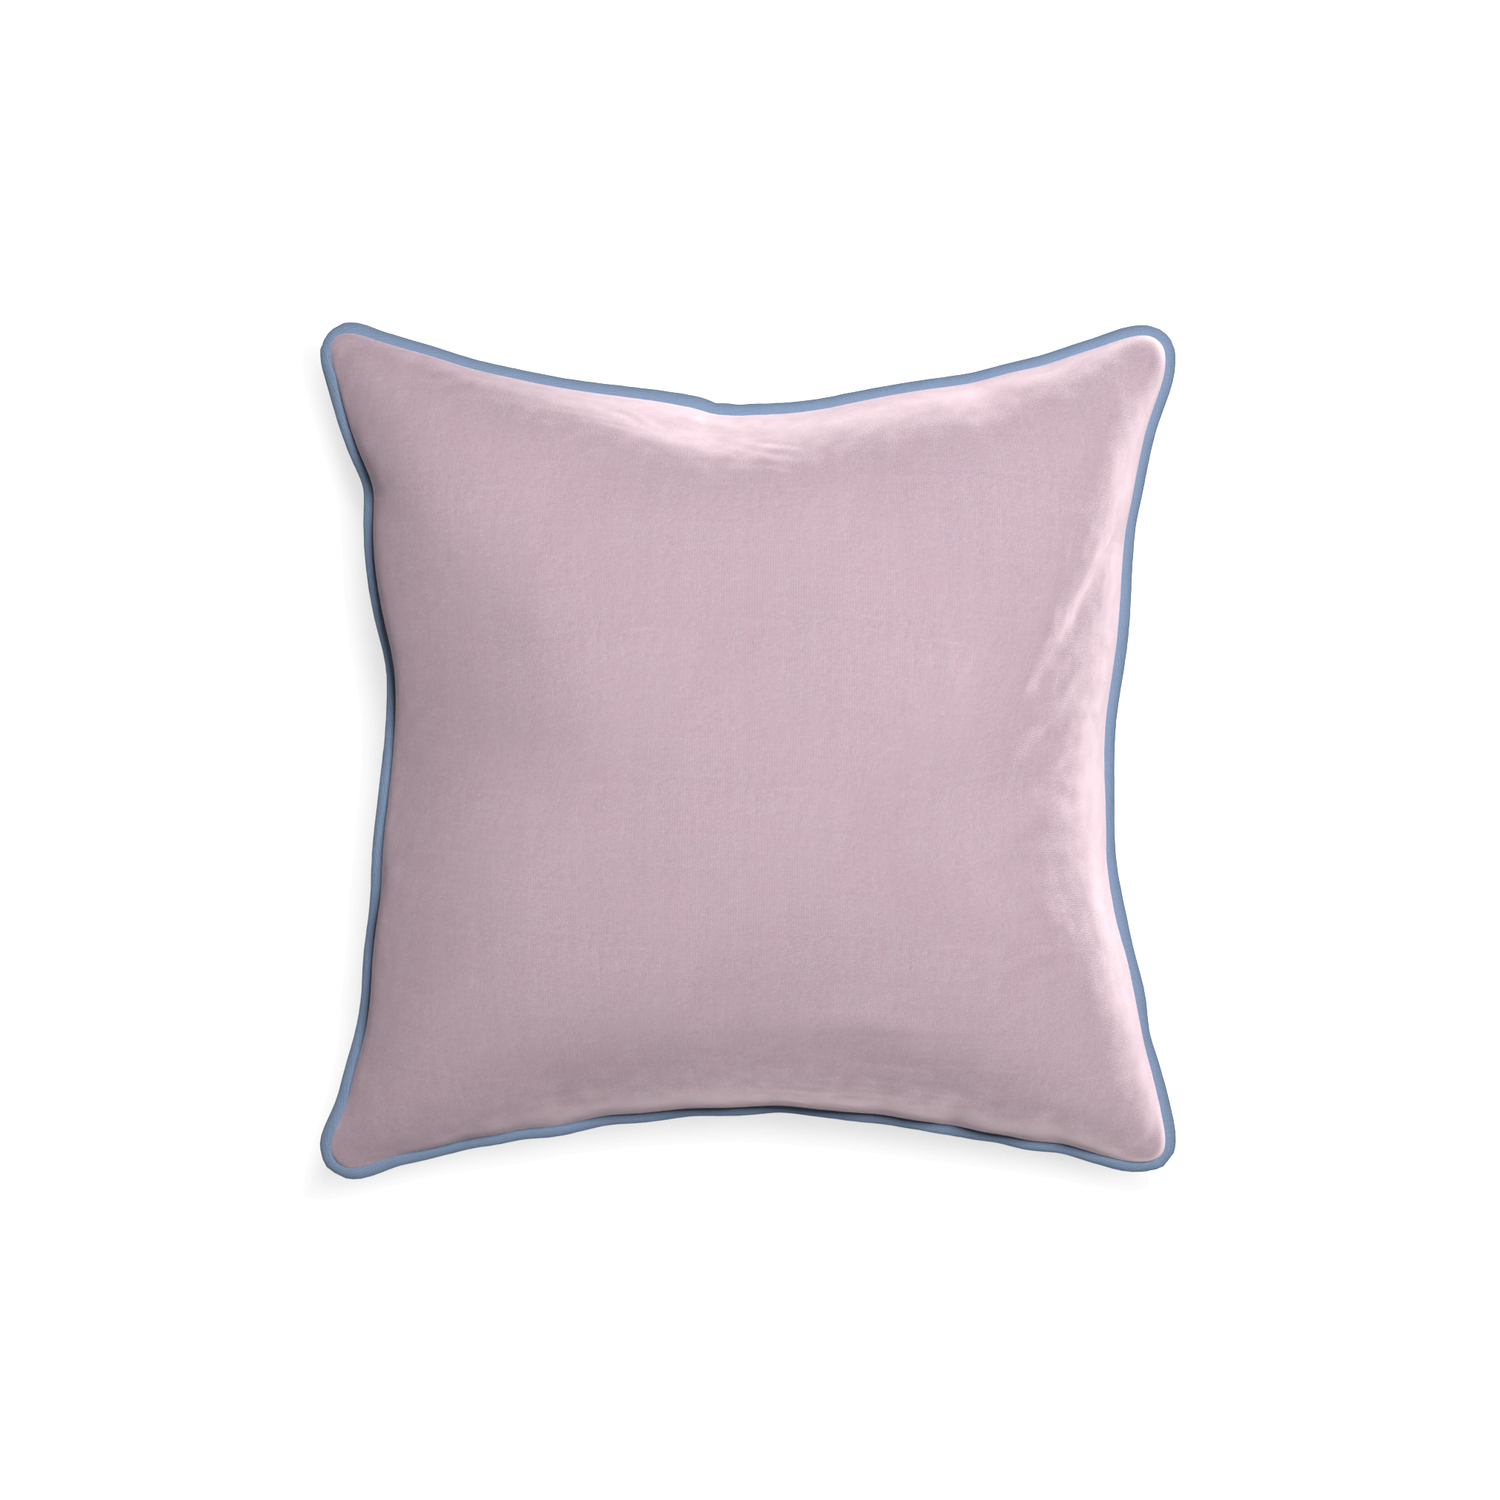 18-square lilac velvet custom pillow with sky piping on white background